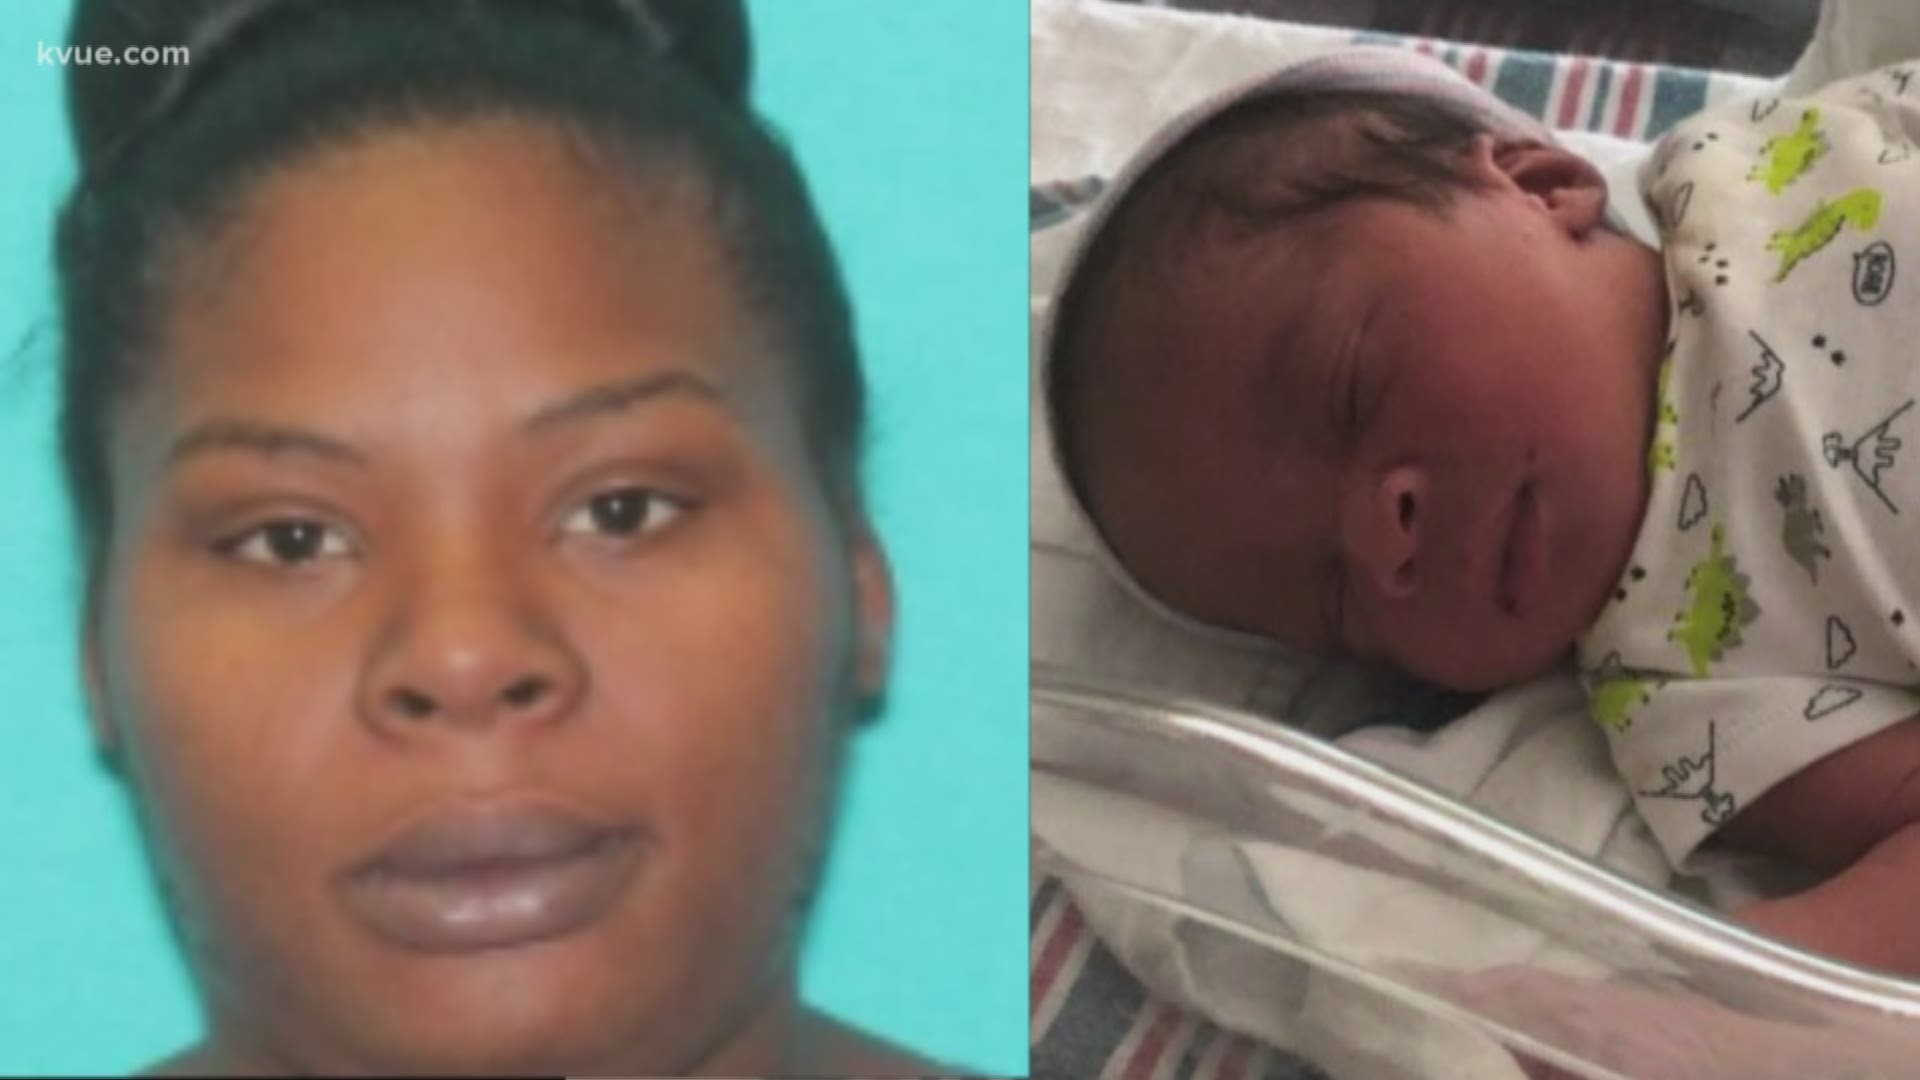 Brittany Smith, the mother whose baby was at the center of an Amber Alert earlier this week, has been arrested.